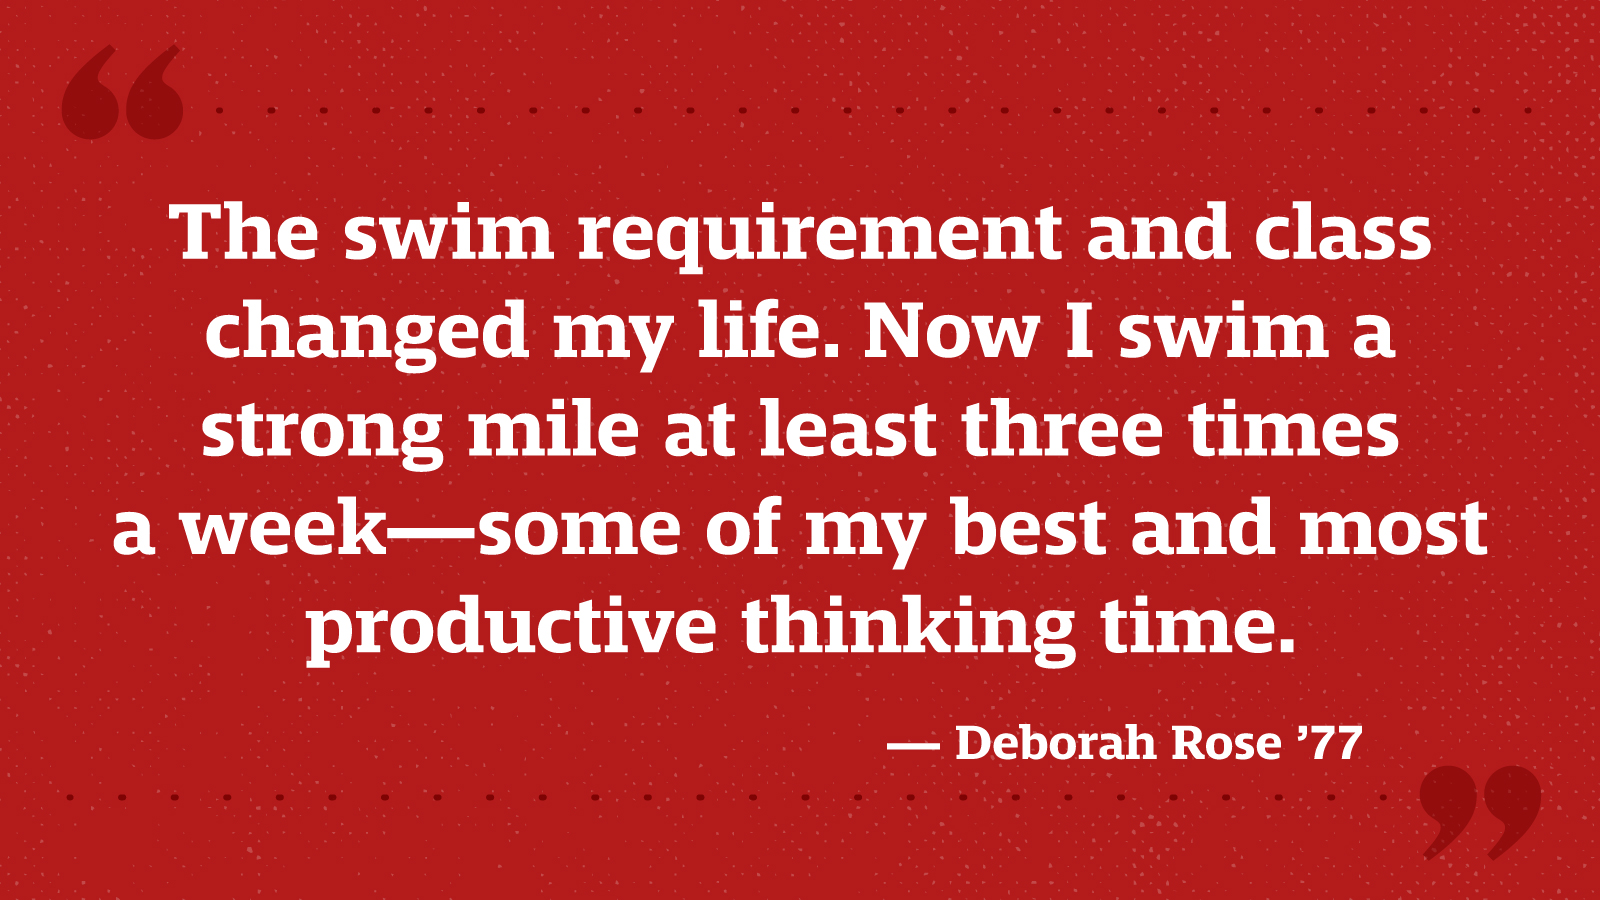 The swim requirement and class changed my life. Now I swim a strong mile at least three times a week—some of my best and most productive thinking time. — Deborah Rose ’77